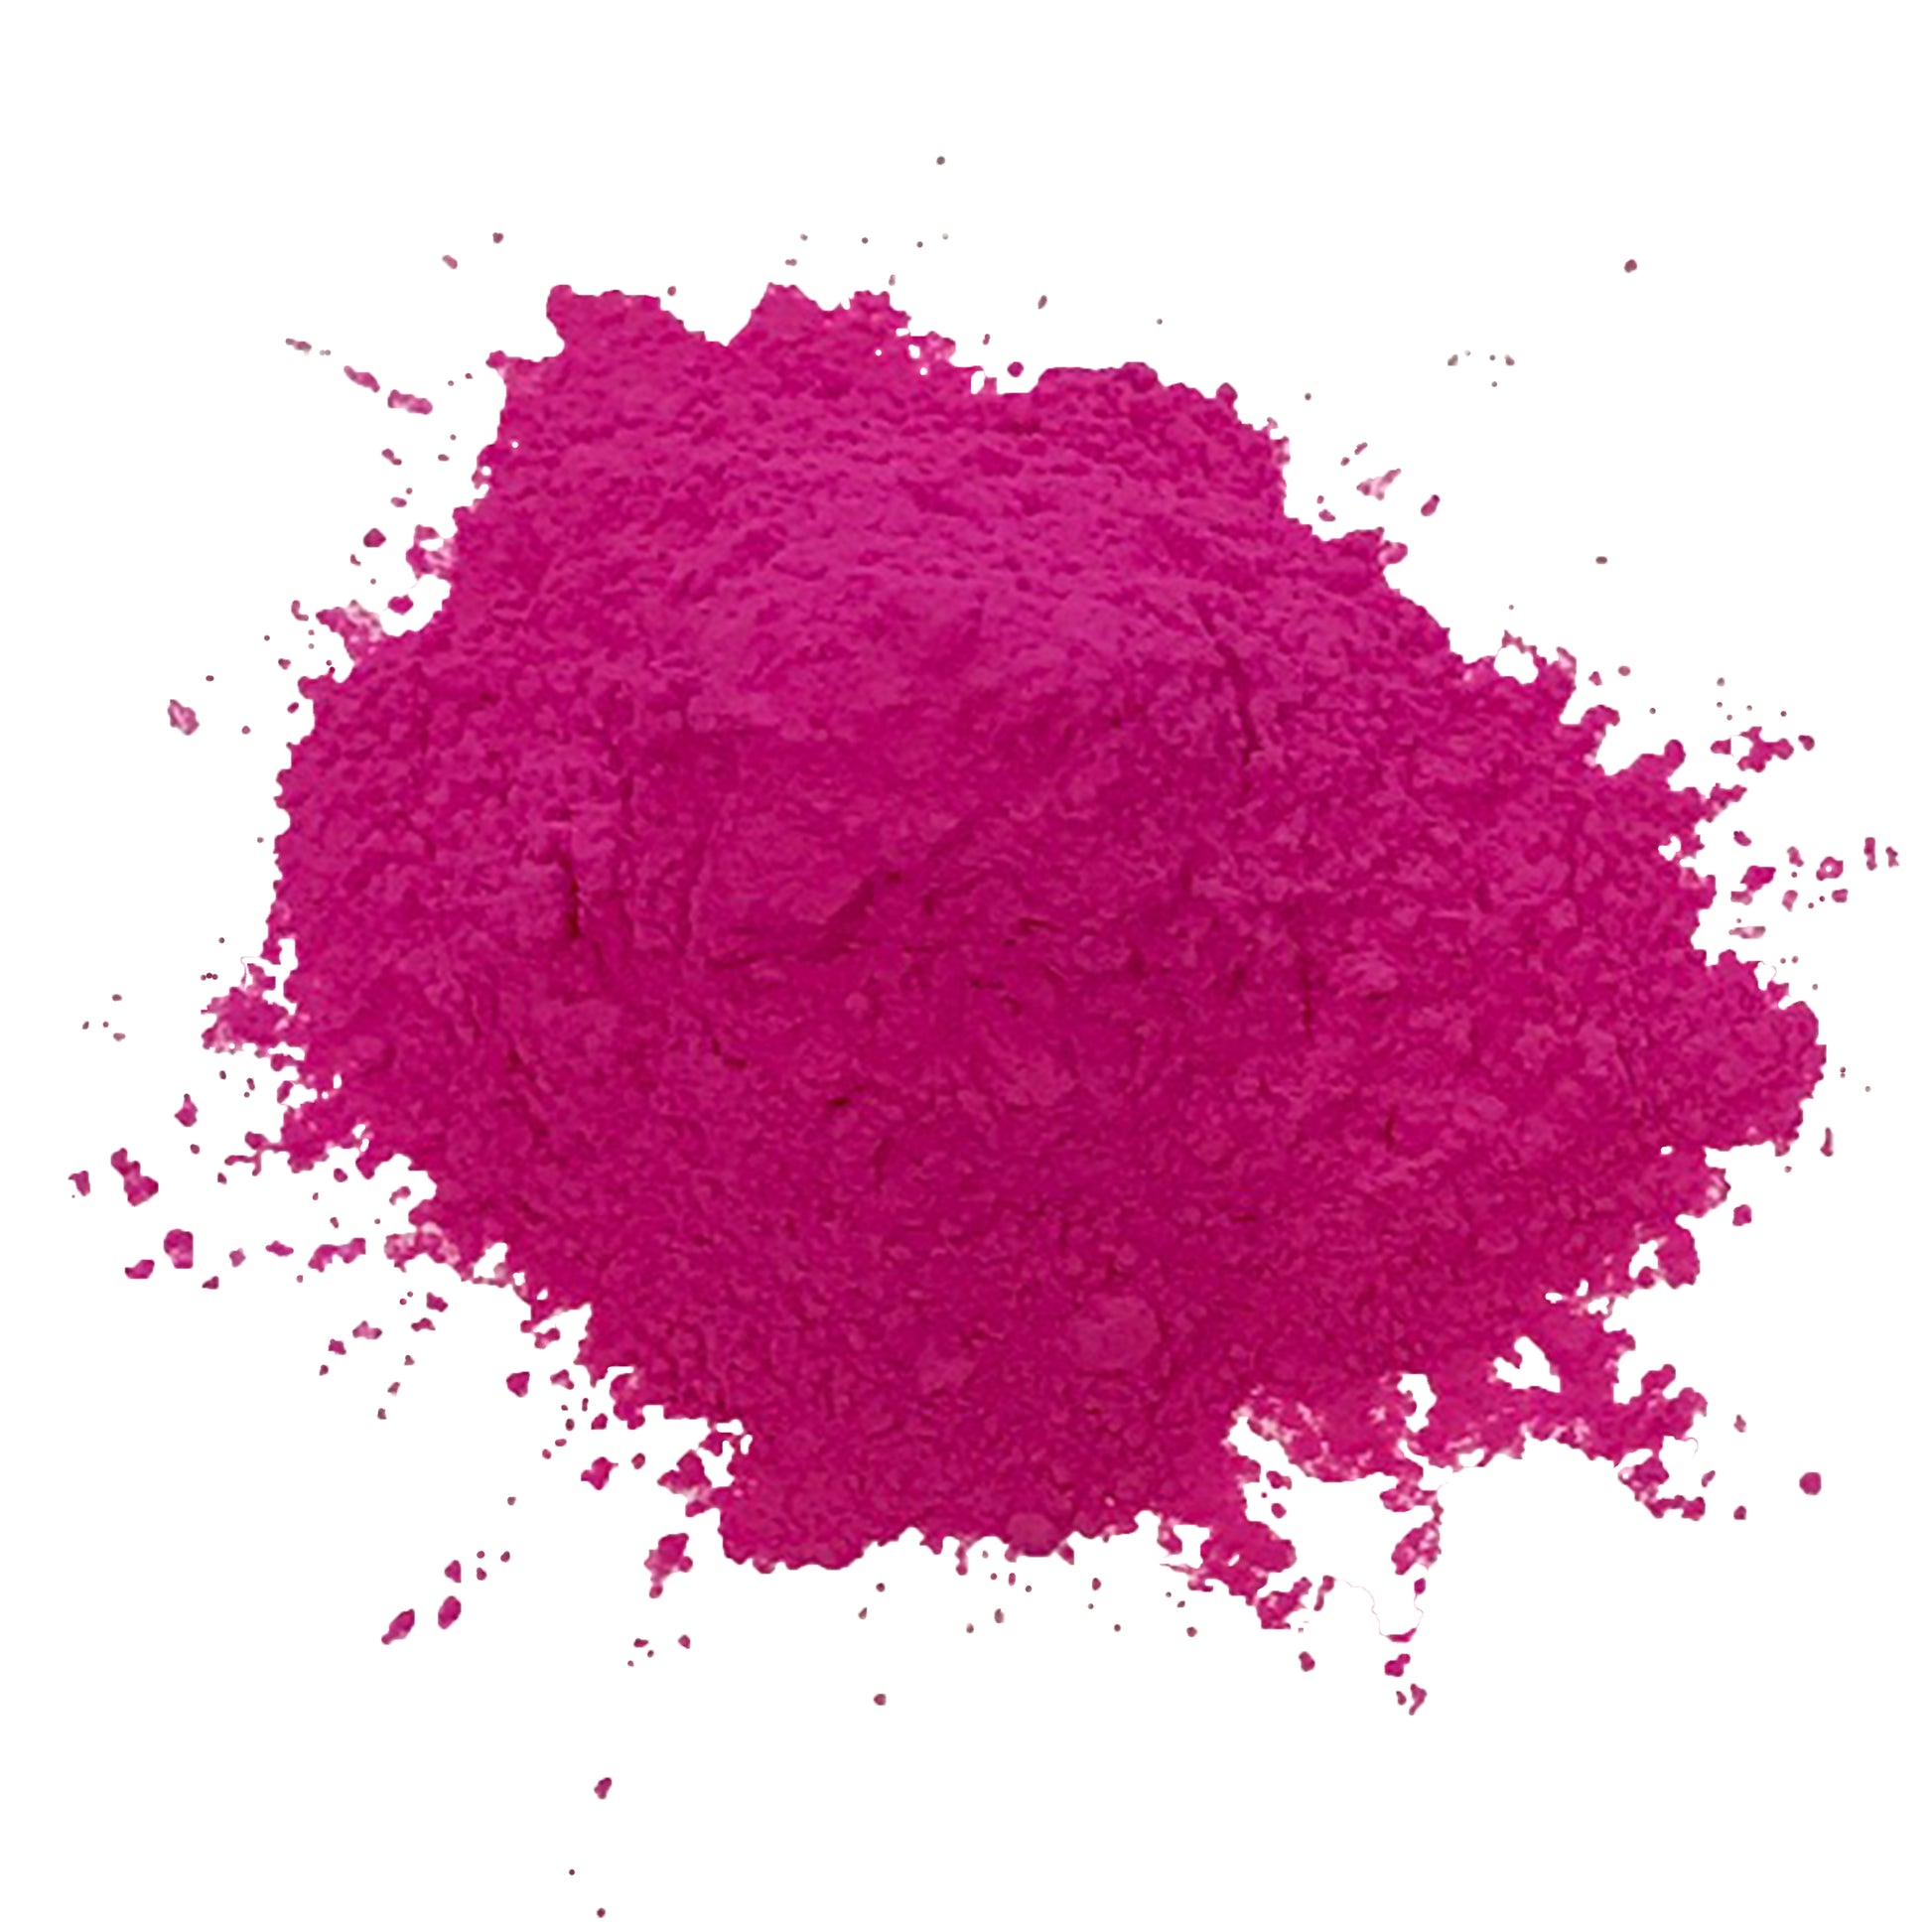  Gulal Holi Powder-Gulal Colour Powder - Pack of 5, 100g  Each,Color Powder Festival Colors : Arts, Crafts & Sewing